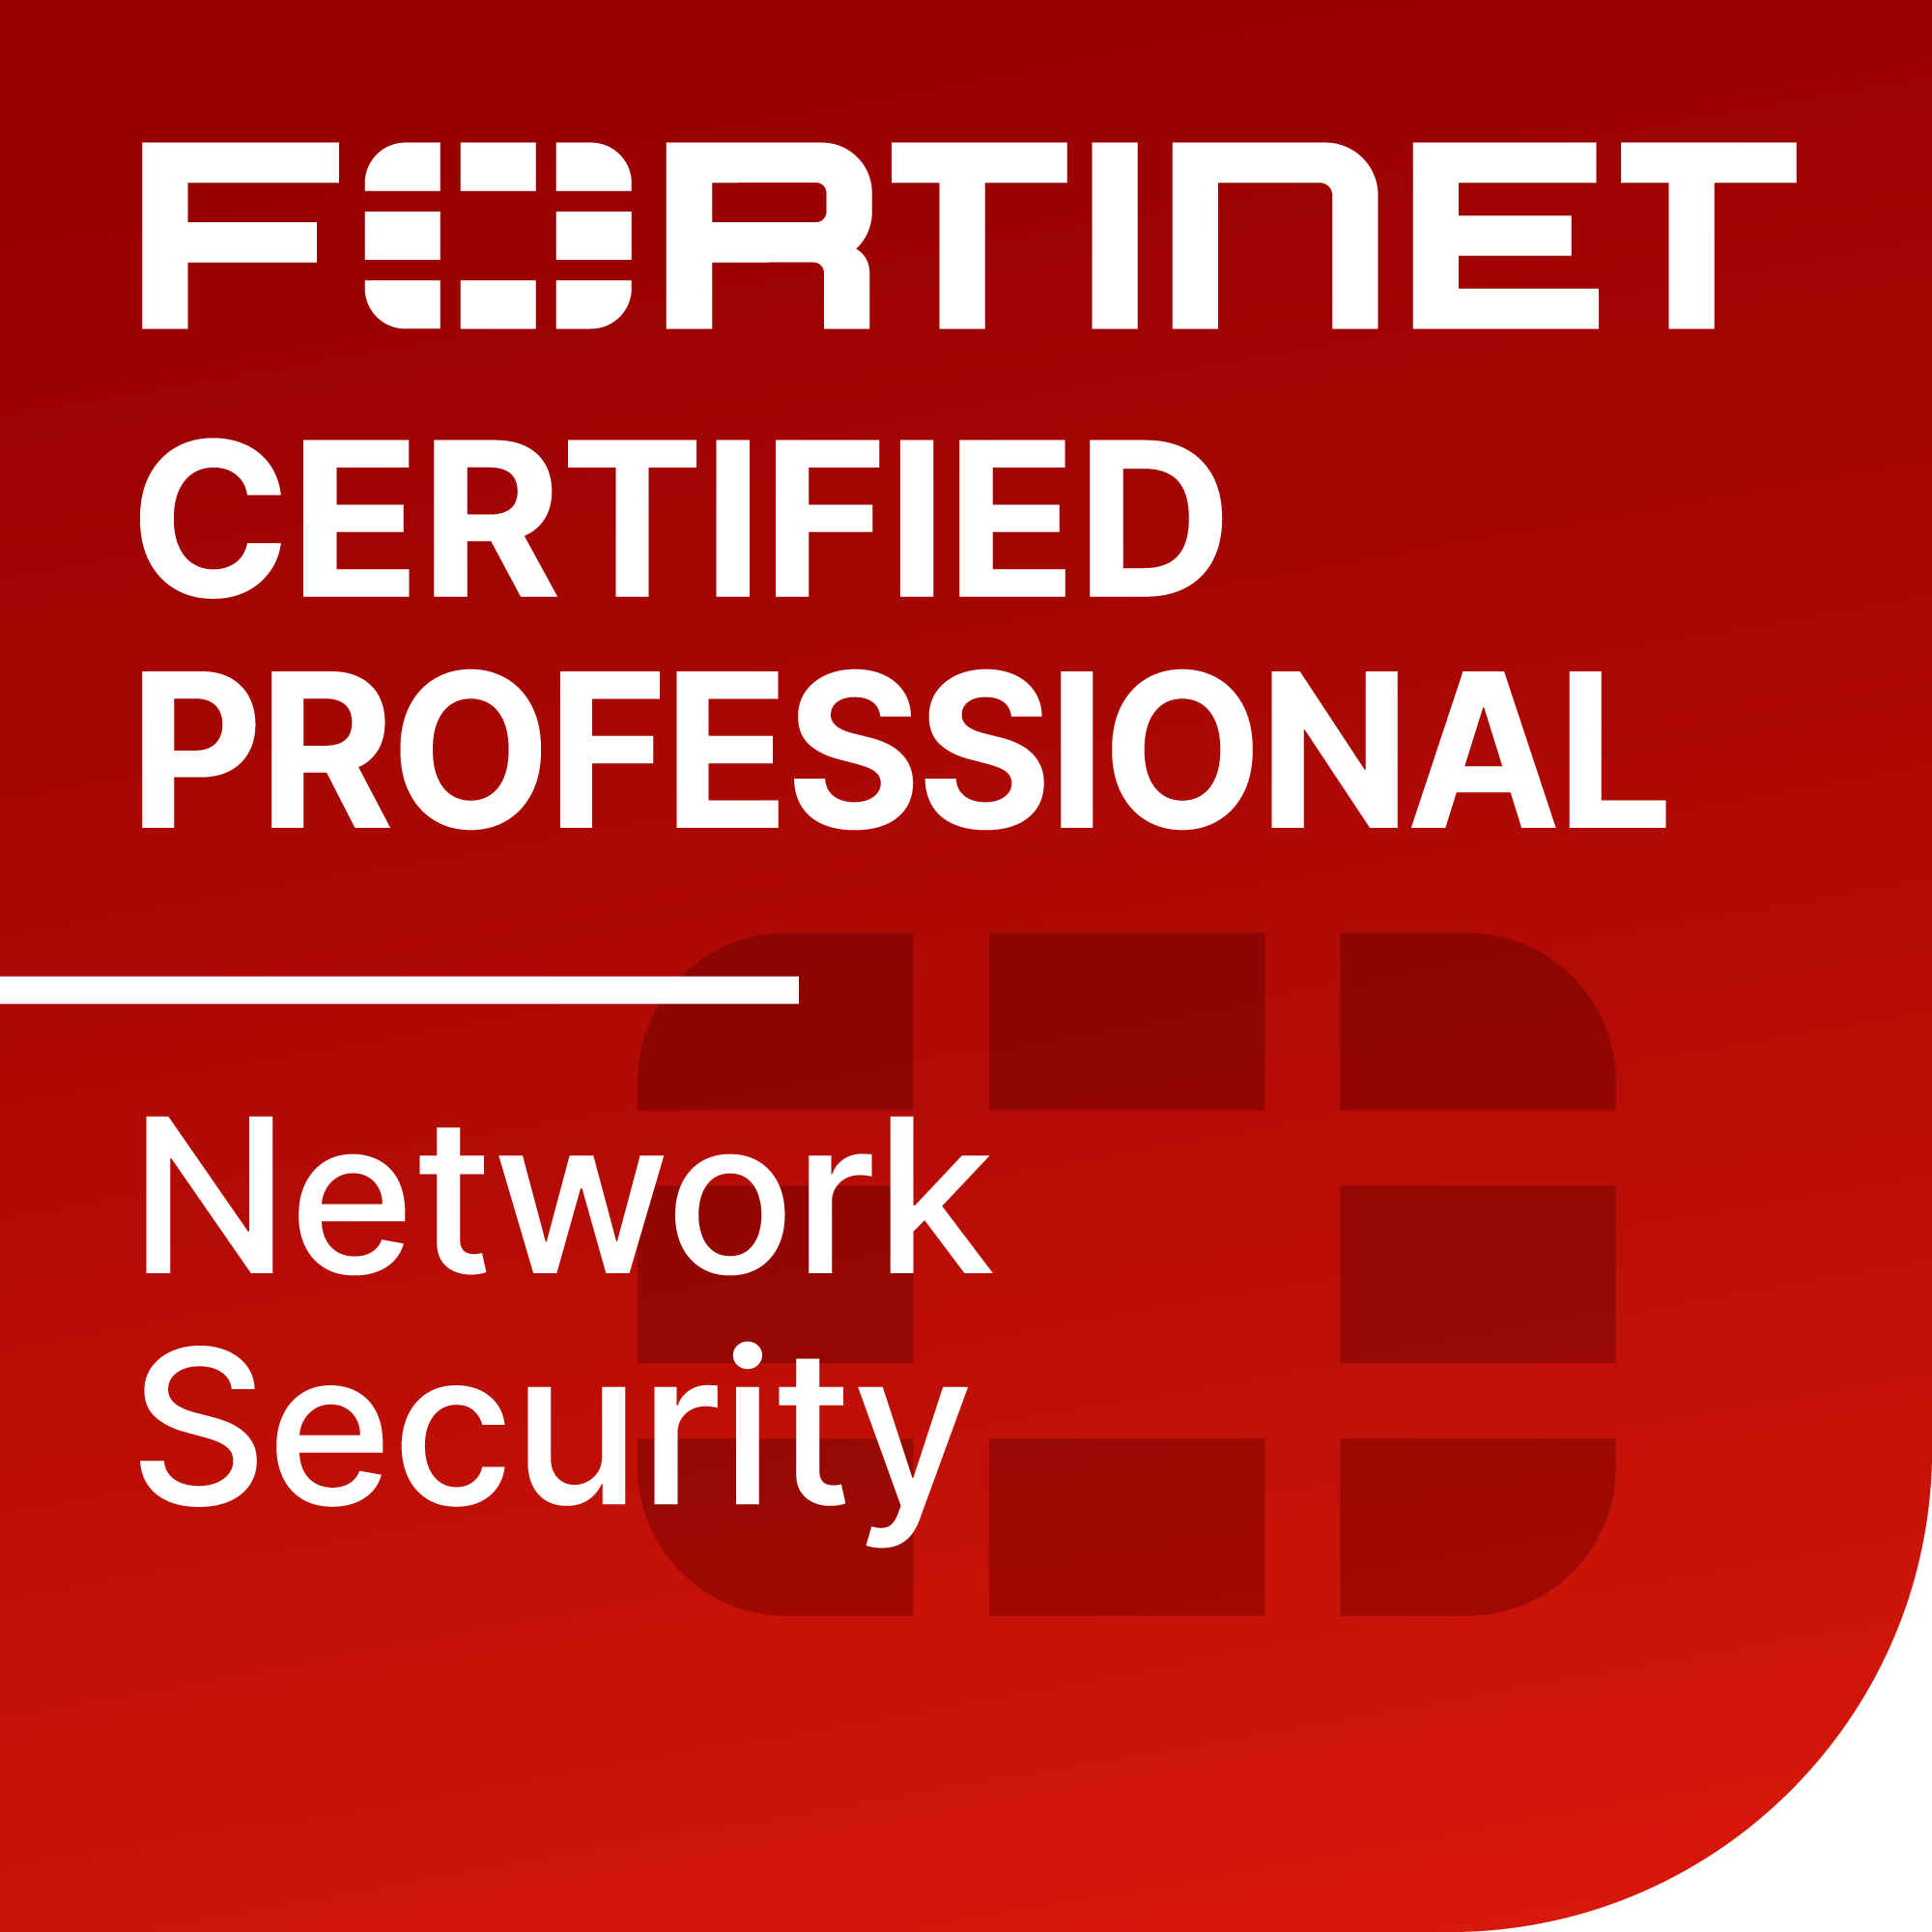 Fortinet Certified Professional Network Security badge